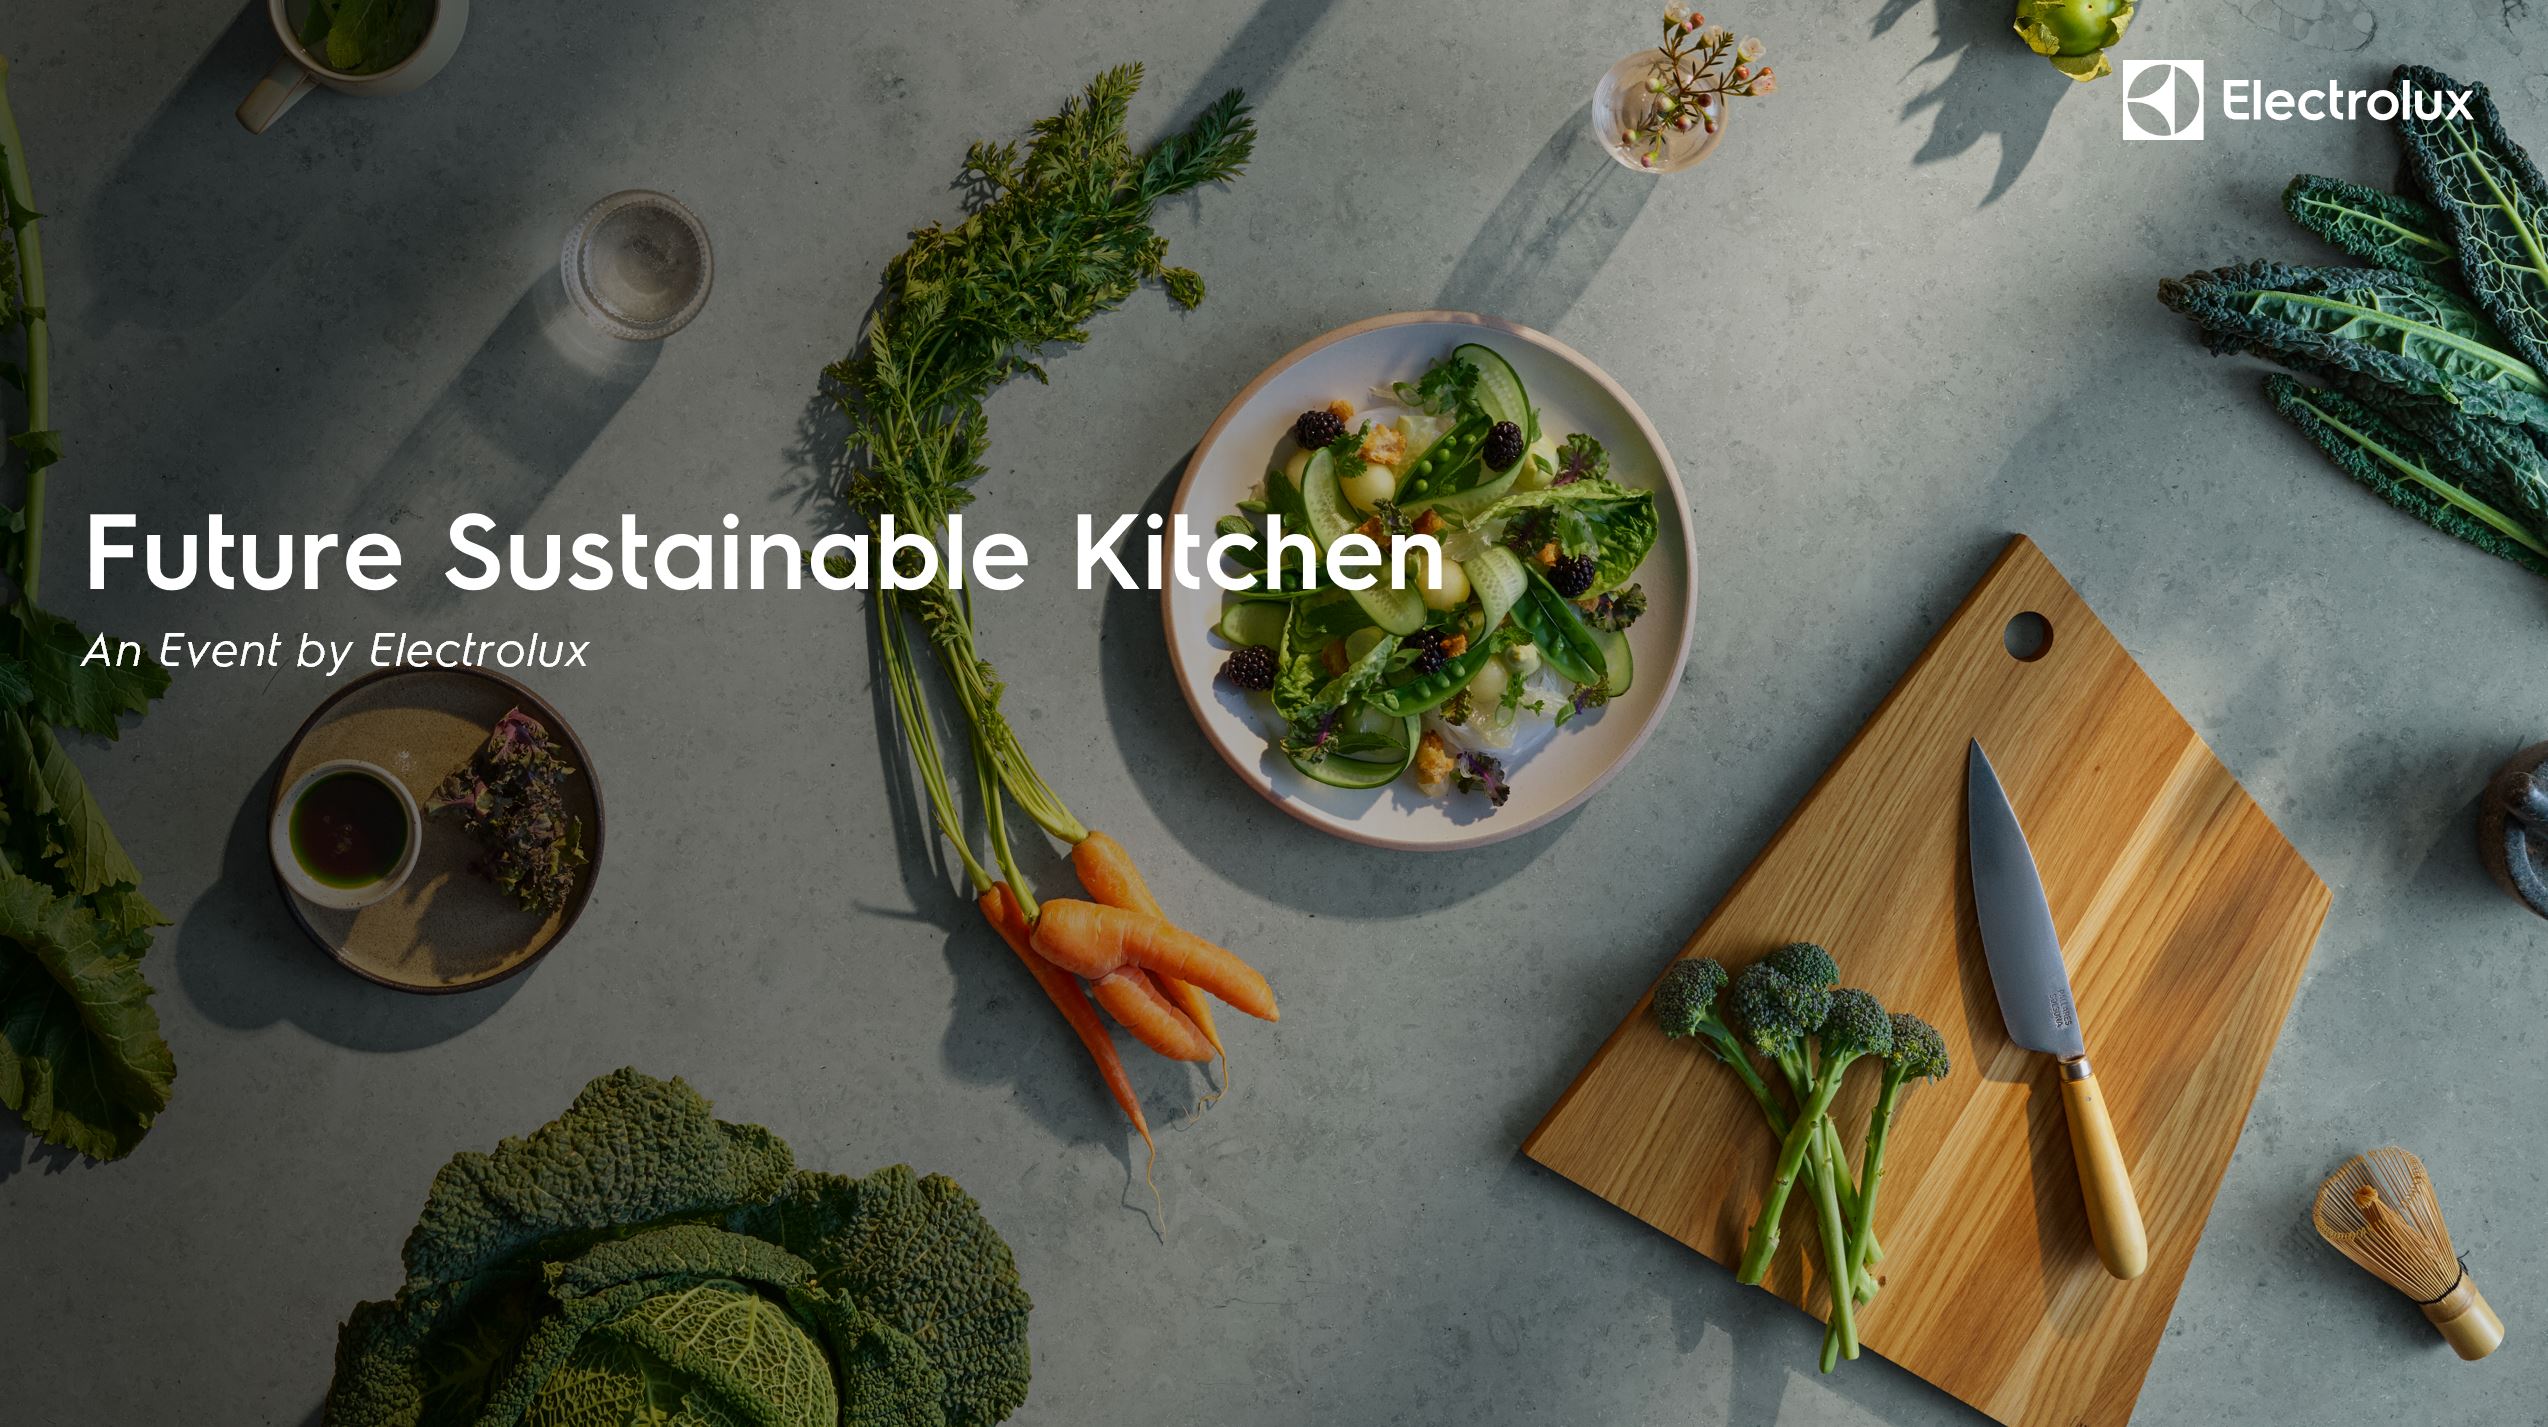 Electrolux Hosts Event To Debate The Future Sustainable Kitchen